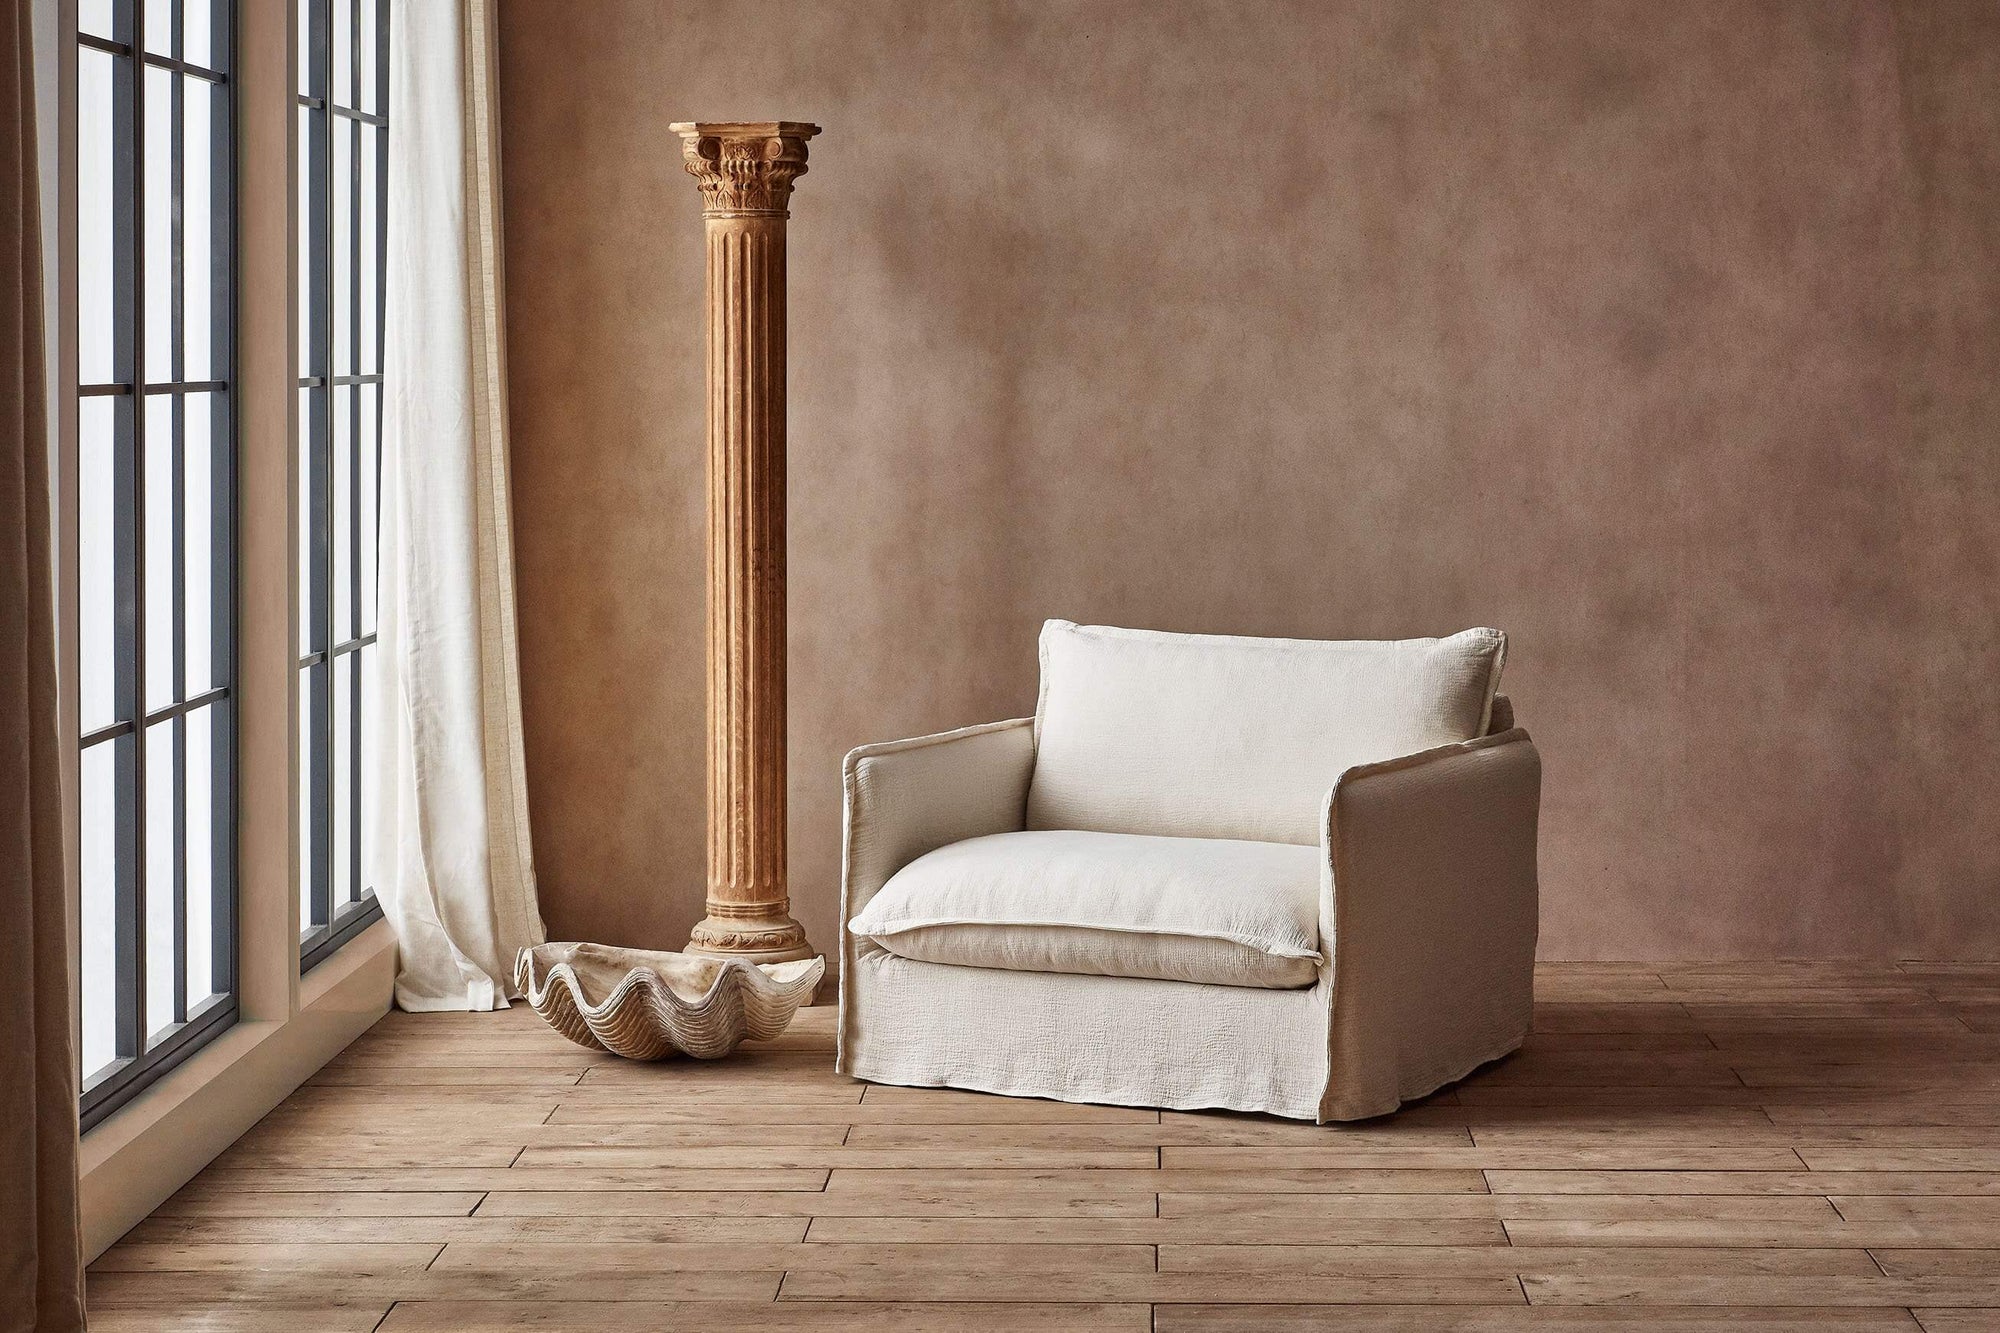 Neva Chair in Corn Silk, a light beige Washed Cotton Linen, placed in a brightly lit room with a column and a decprative shell sculpture.